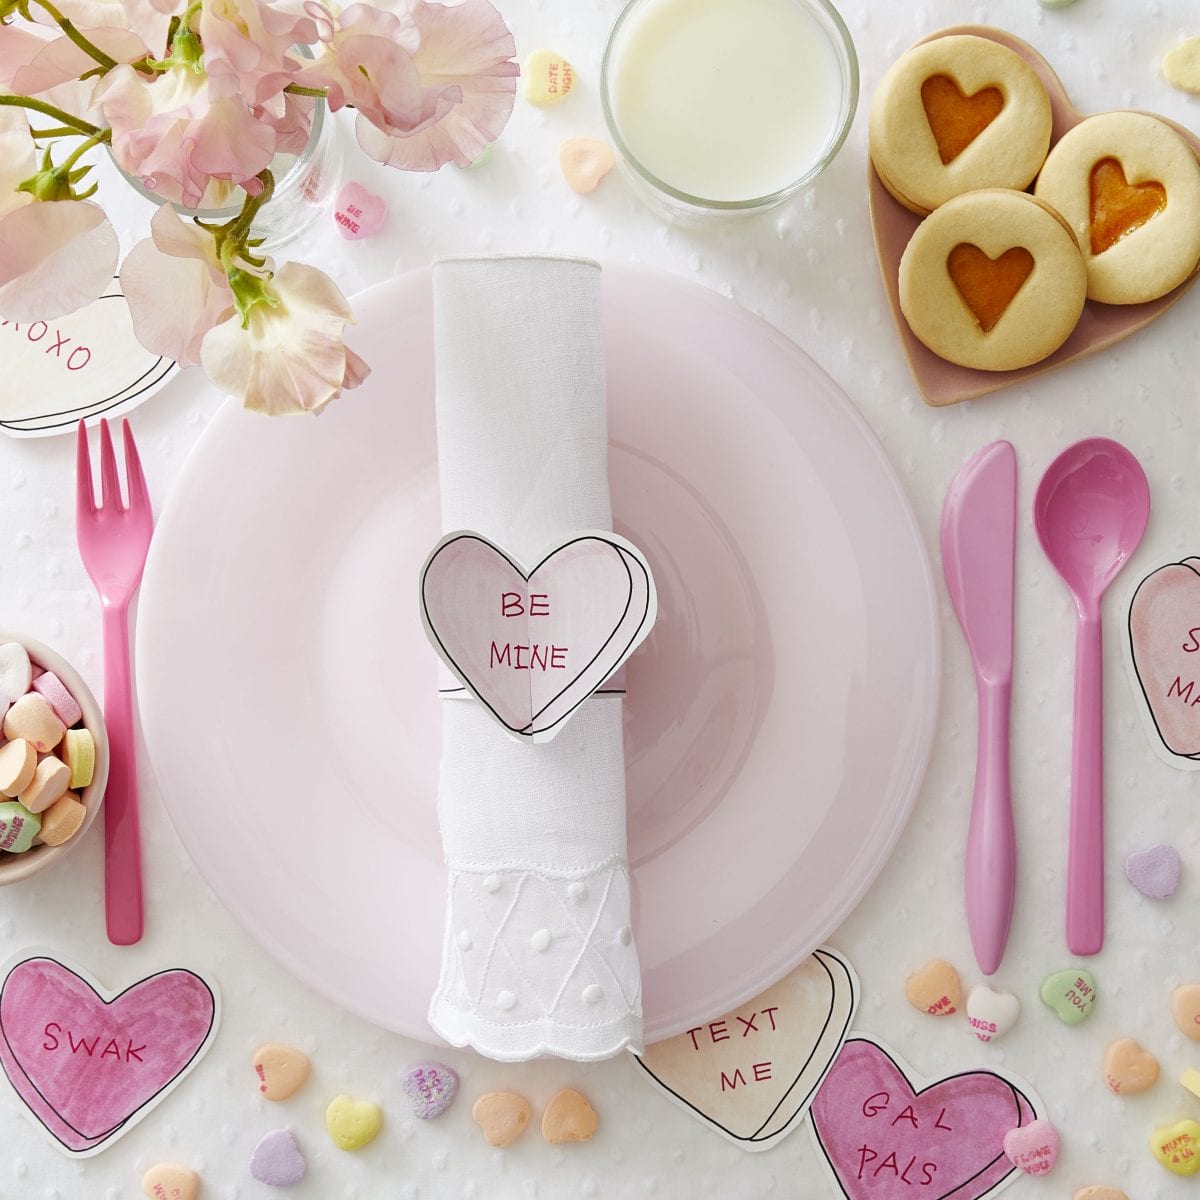 Darcy Miller Designs, Napkin ring, Valentines, love note, conversation heart, paper heart, candy heart, napkin ring, paper table setting, easy, downloadable, hostess, Galentines, be mine, xoxo, Darcy Miller, DIY